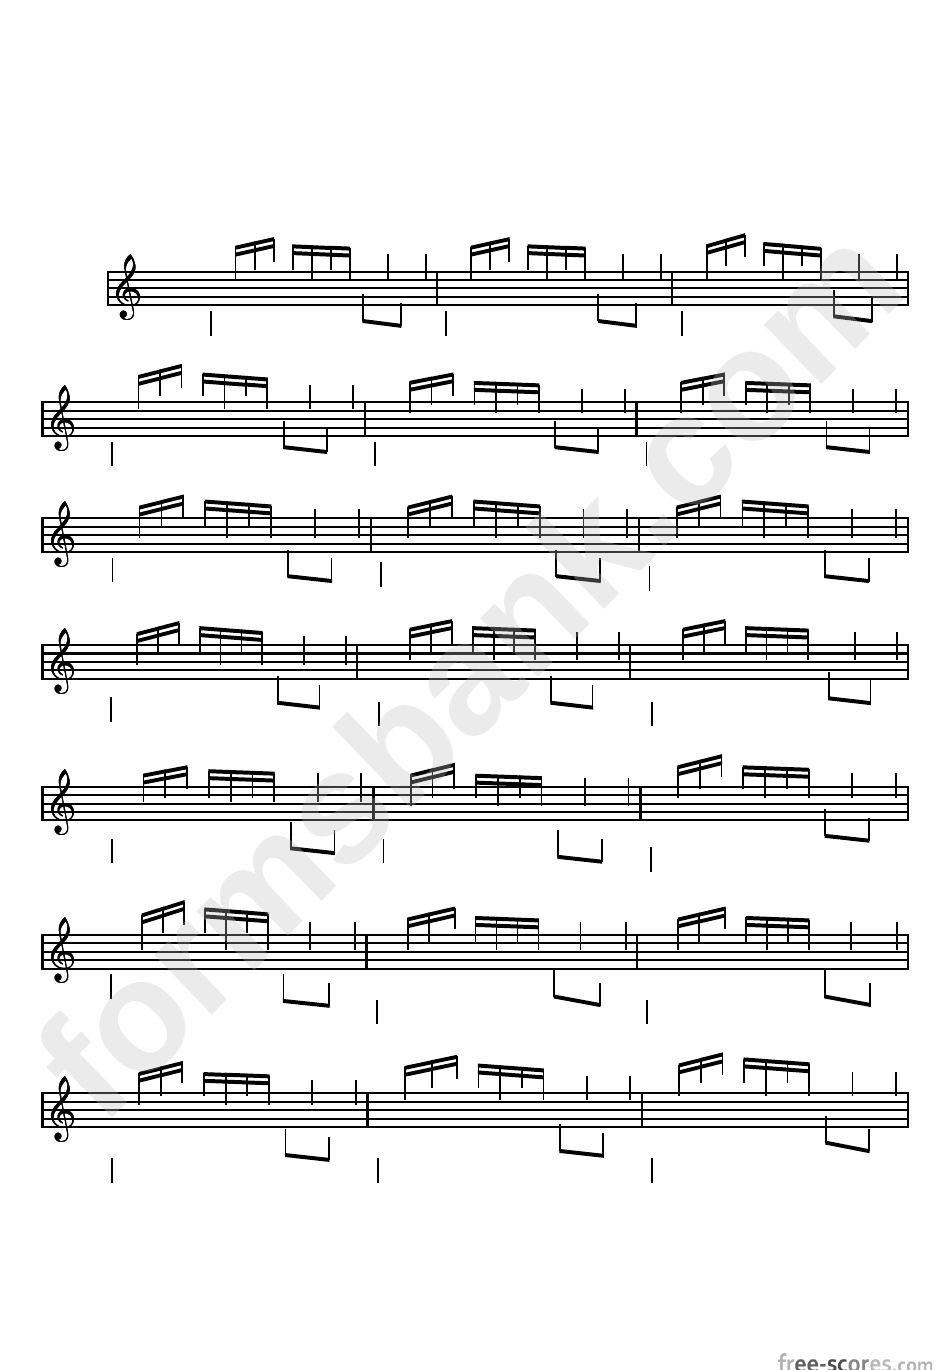 J.s.bach - Prelude In D Minor Sheet Music